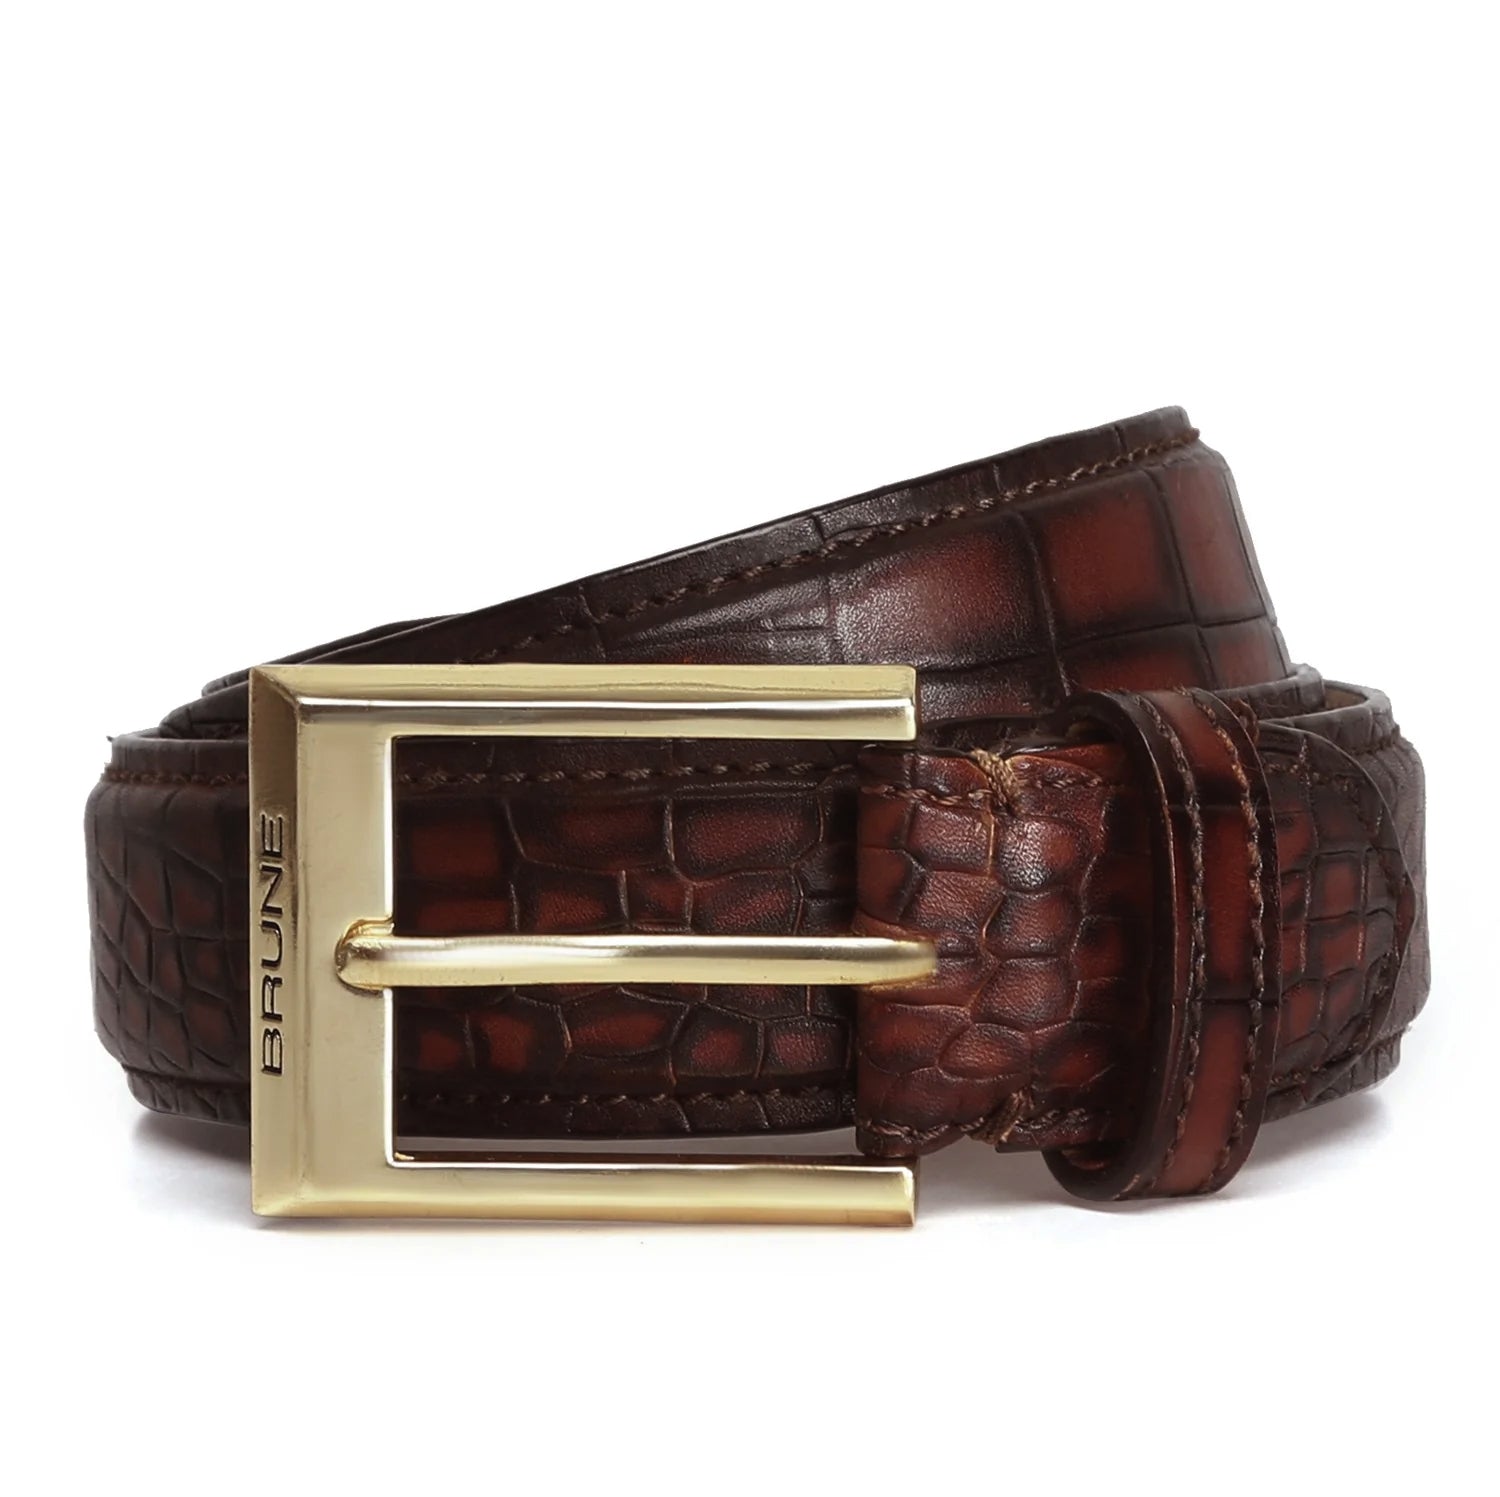 Smokey Finish Men's Belt in Croco textured Leather with Golden Square Buckle